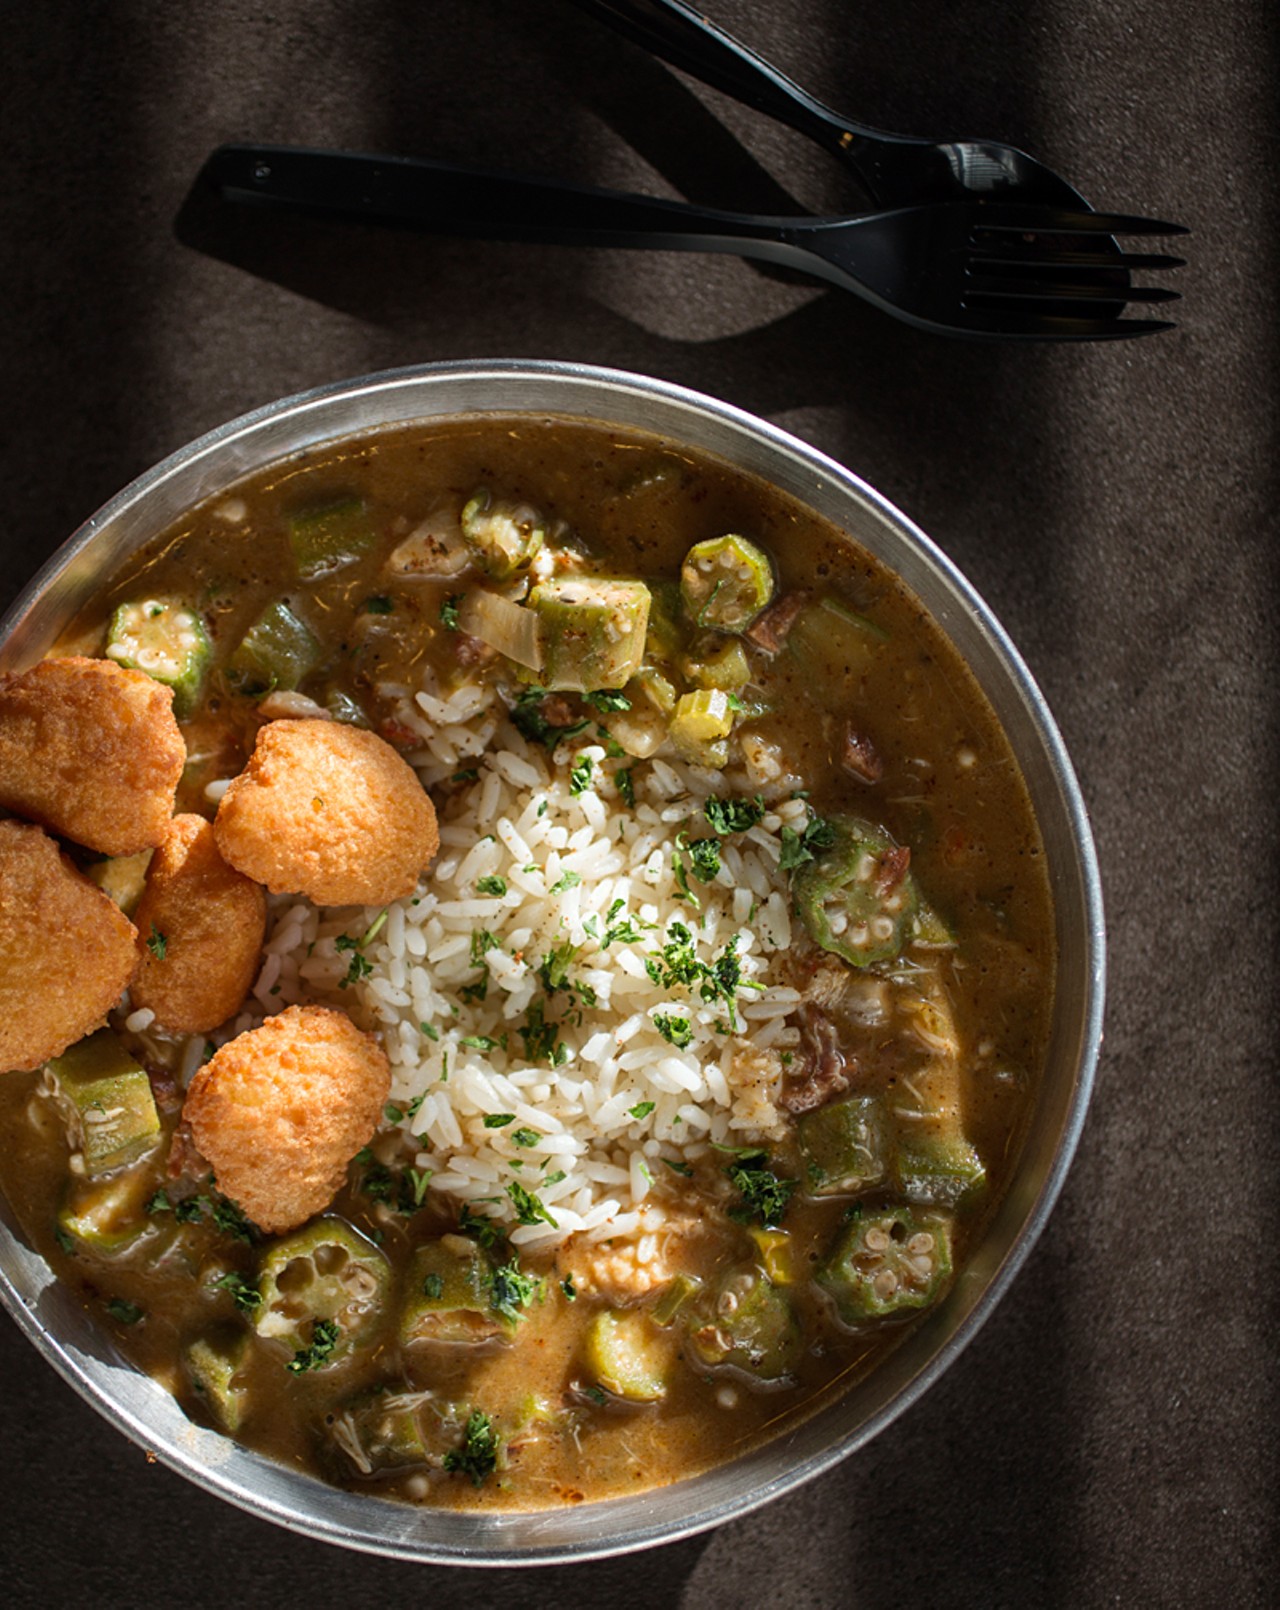 Seafood gumbo - that's chorizo, andouille, crab, crawfish, shrimp, onions, peppers, celery, okra - comes served with rice.